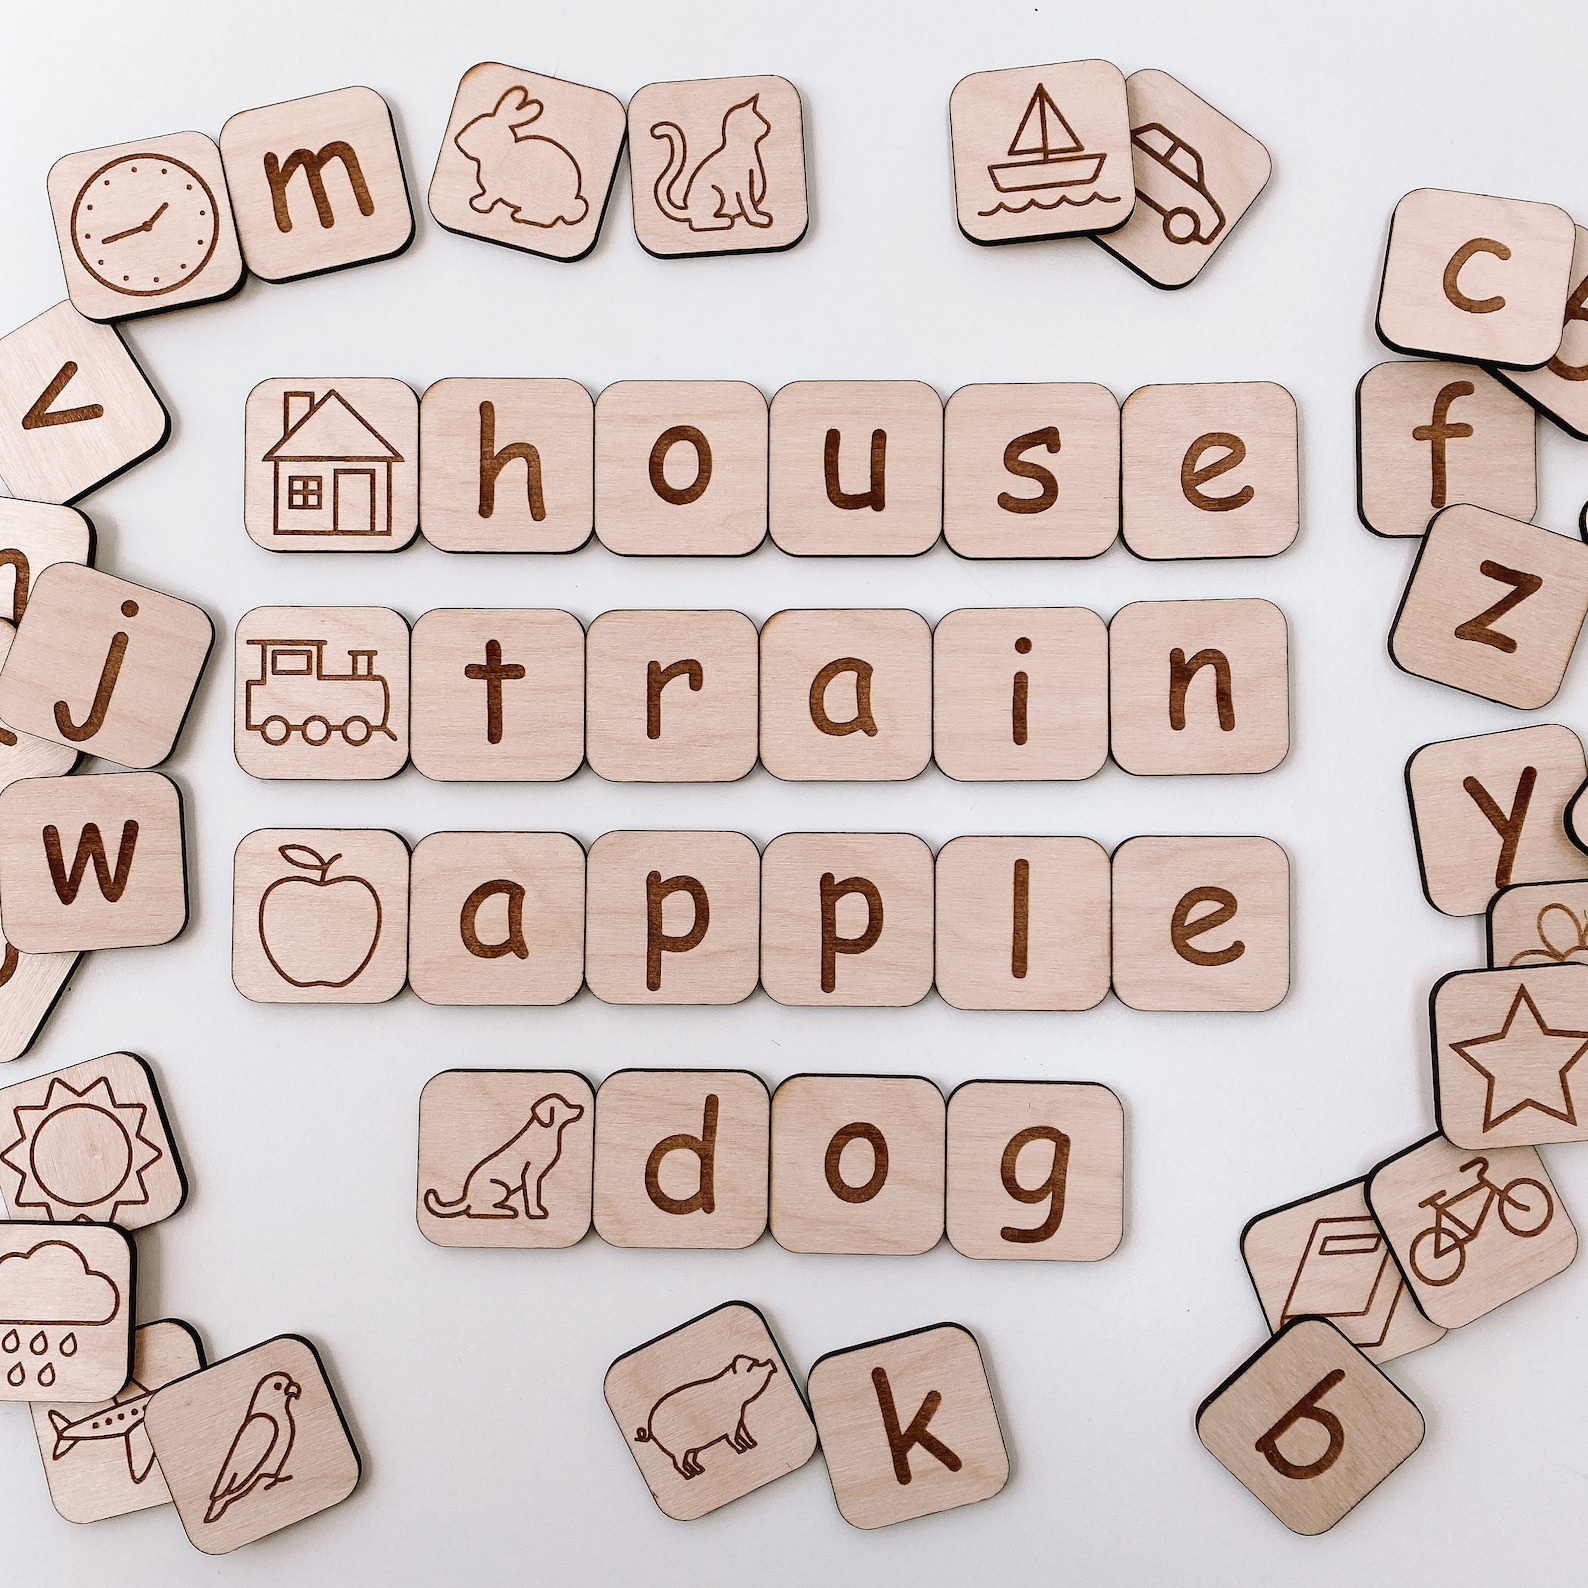 Alphabet Tiles With Pictures Letter Tiles Spelling Game Etsy